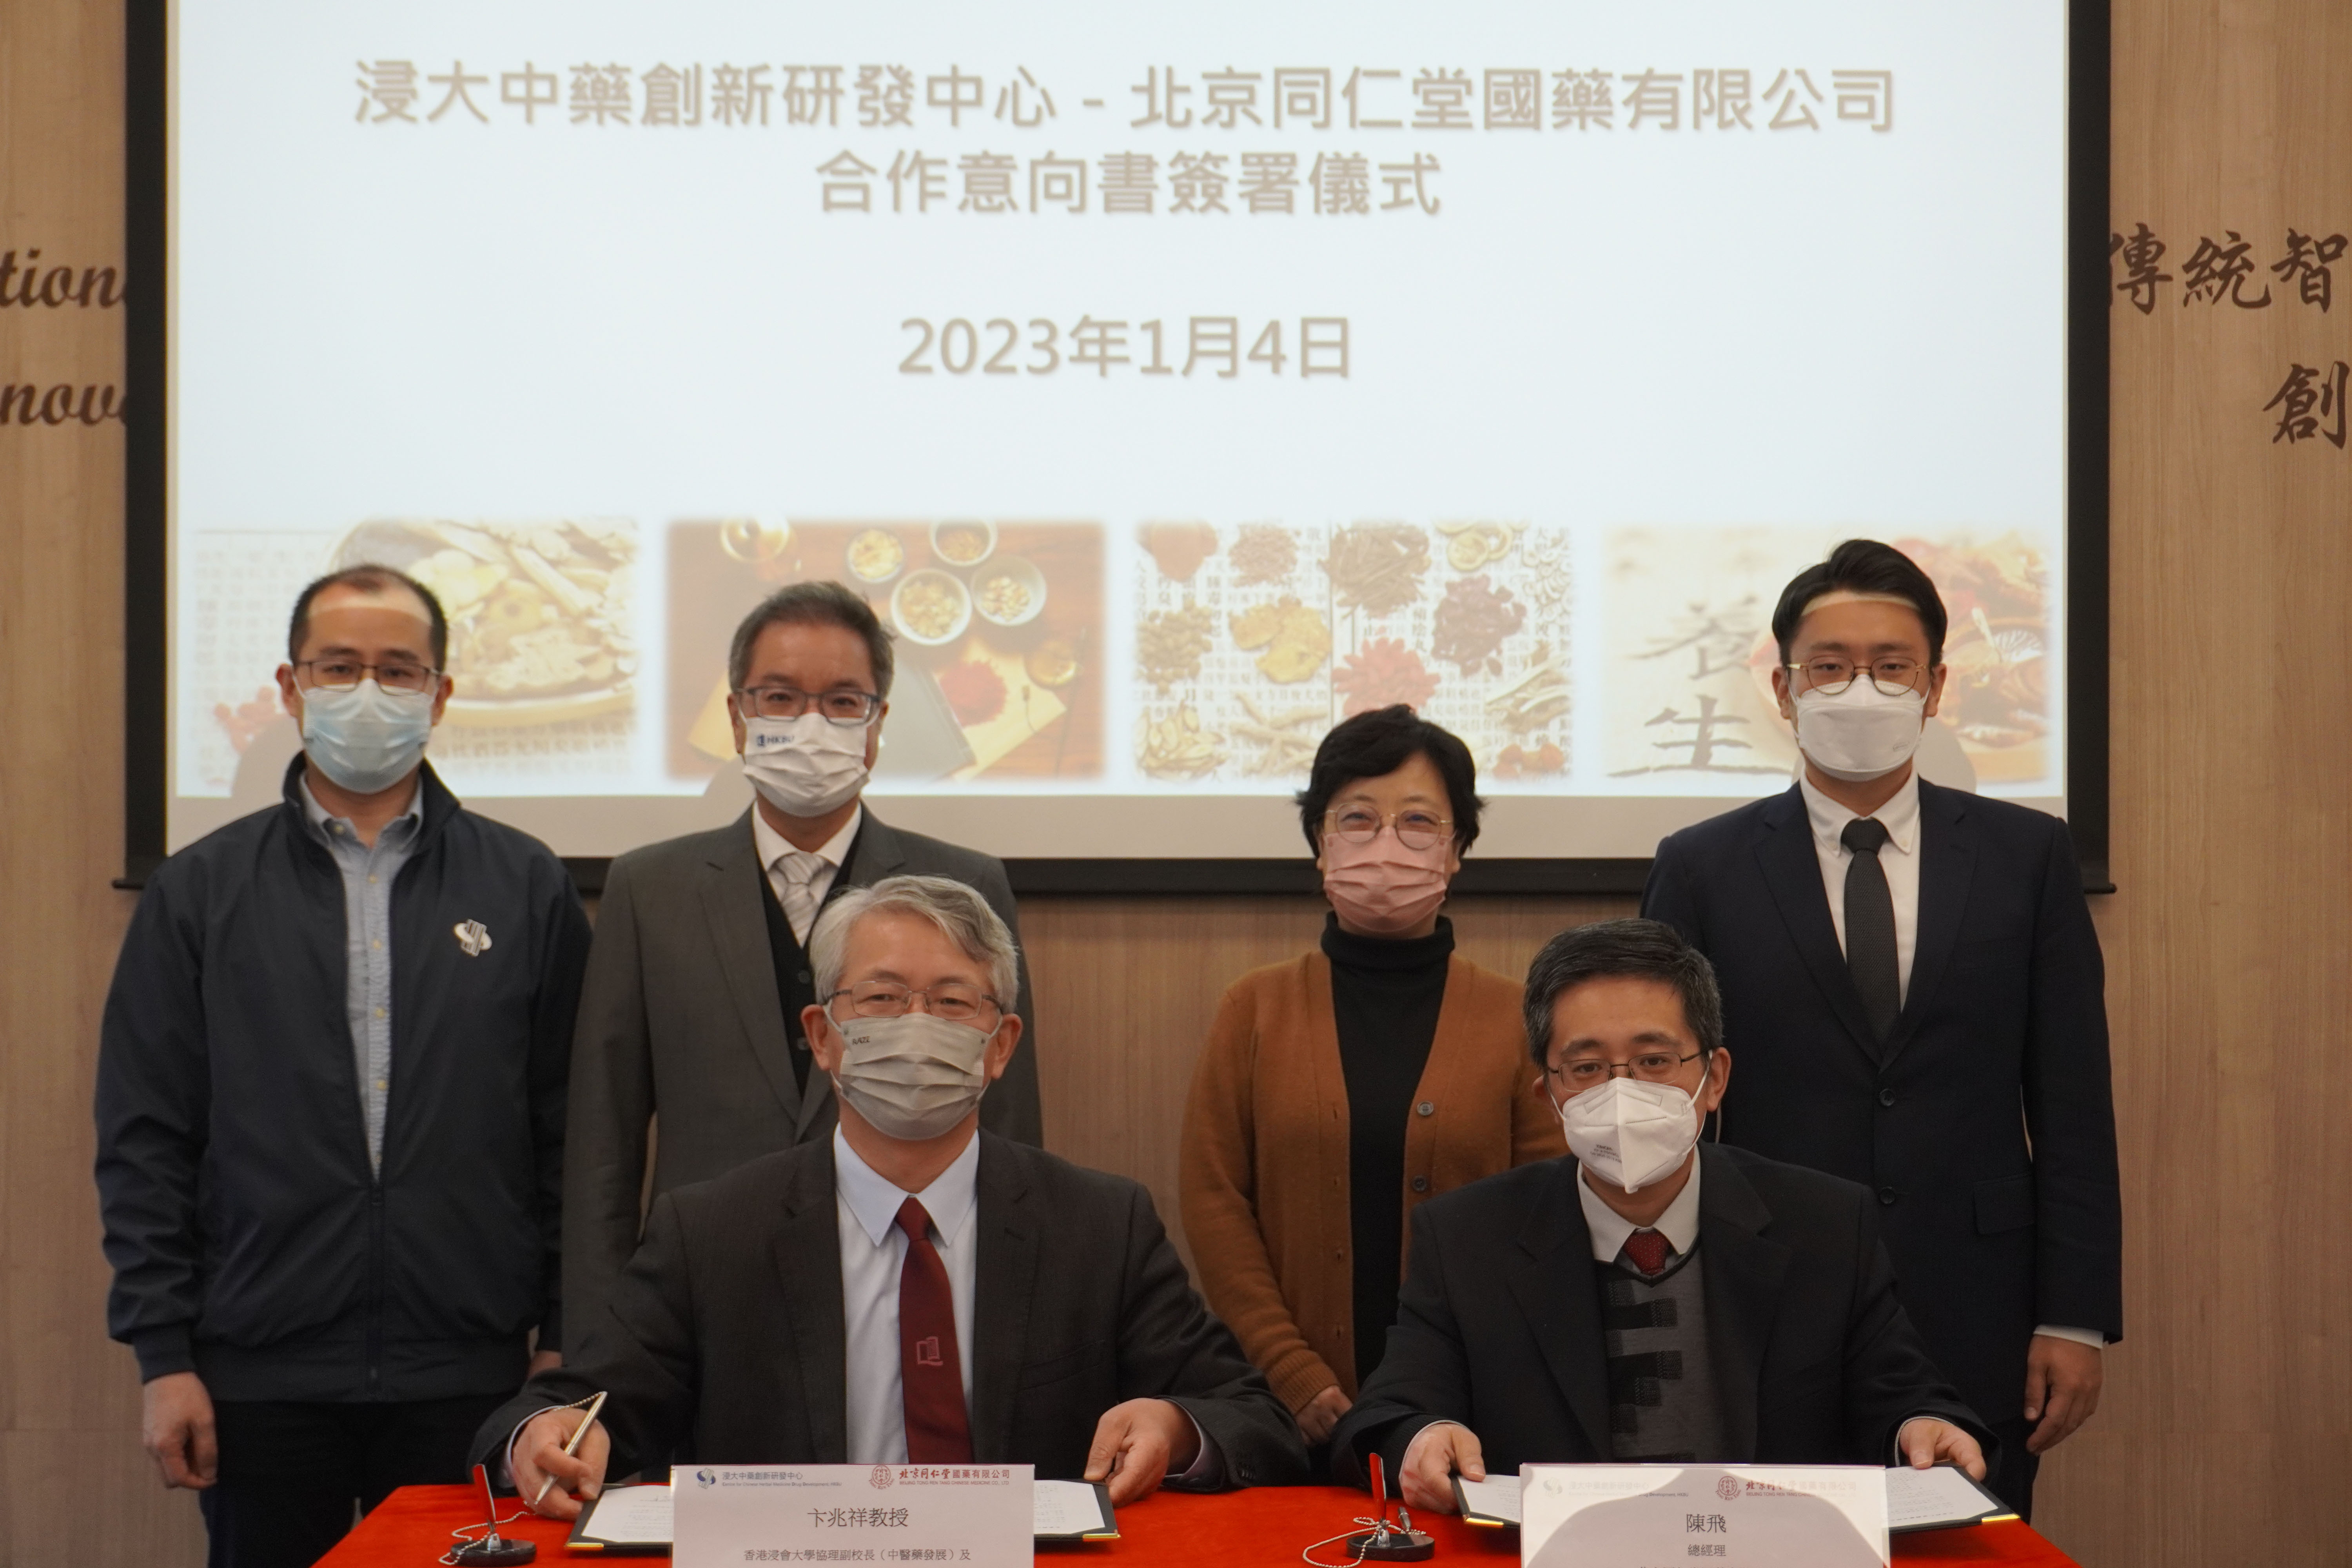 Centre for Chinese Herbal Medicine Drug Development Limited and Beijing Tong Ren Tang collaborates to develop novel Chinese medicine